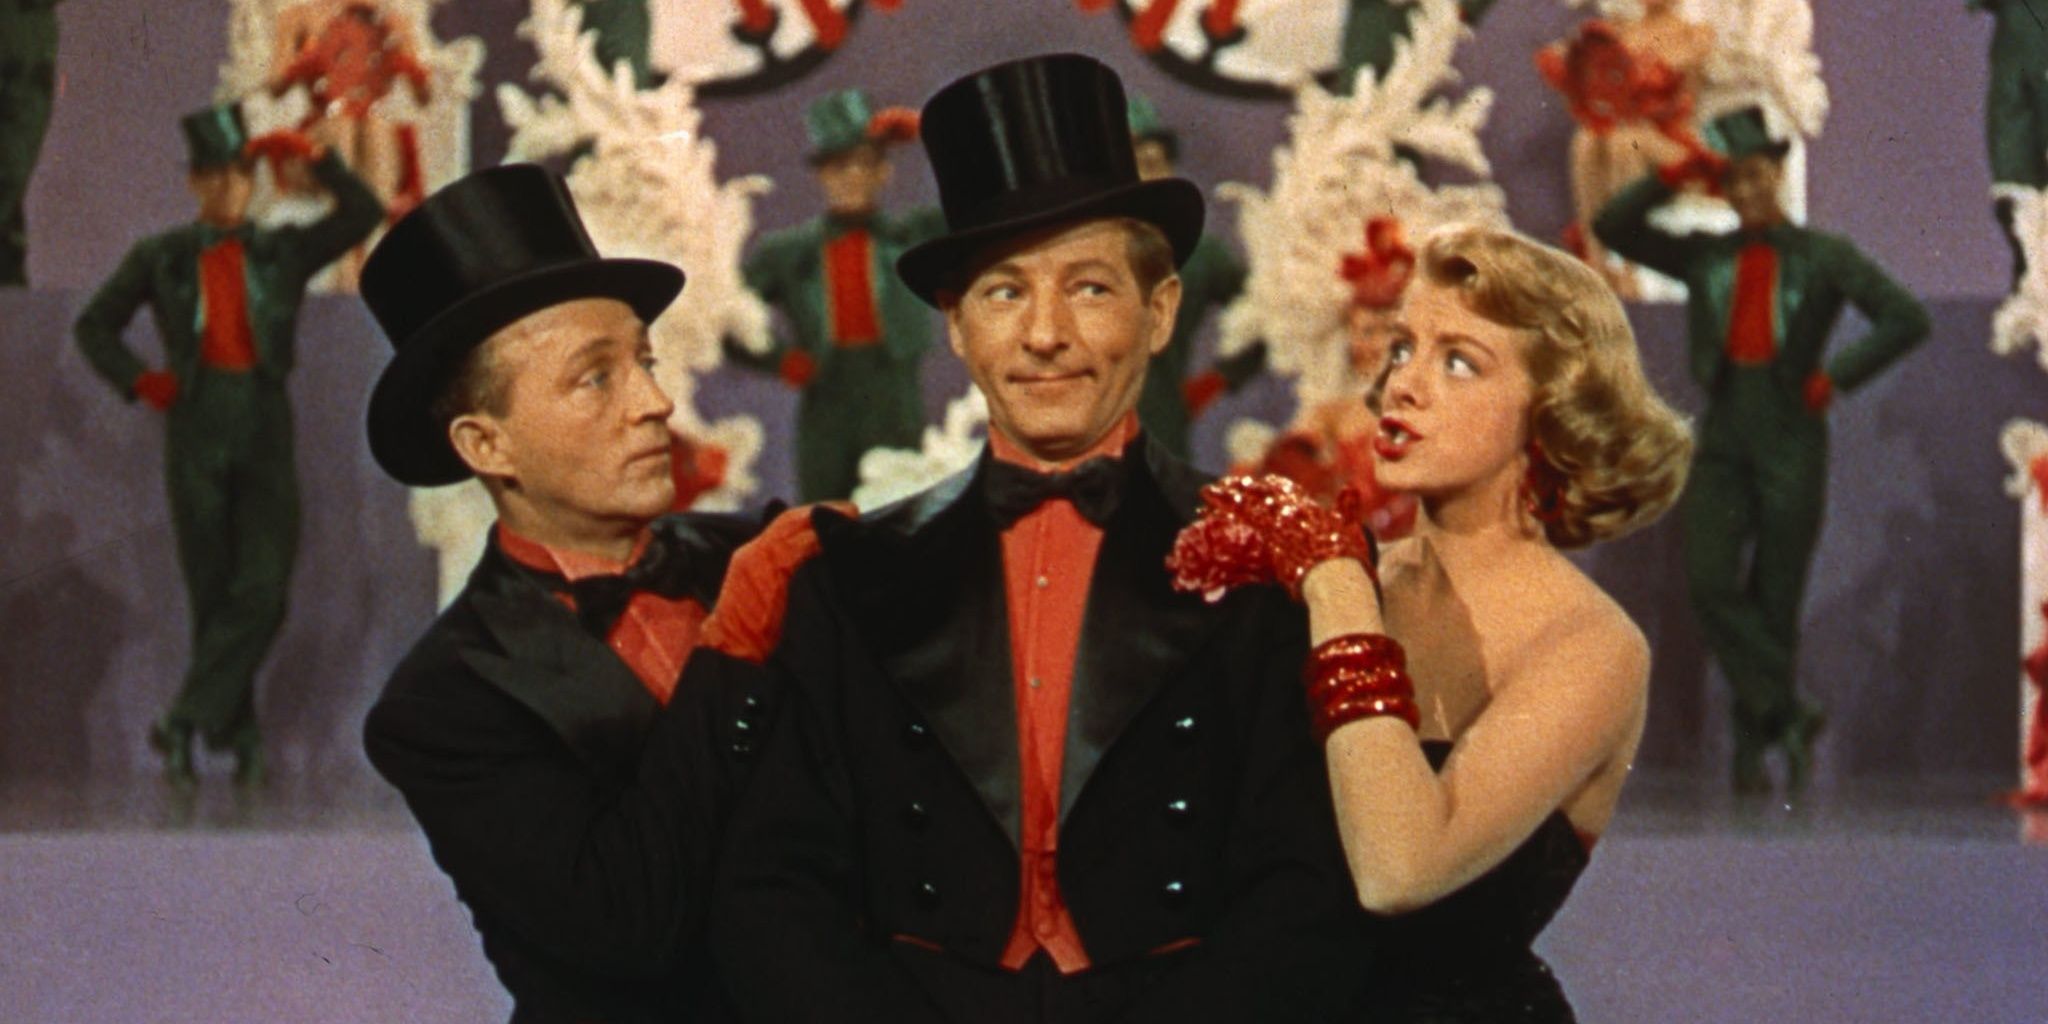 10 Things You Didn’t Know About The Making Of White Christmas